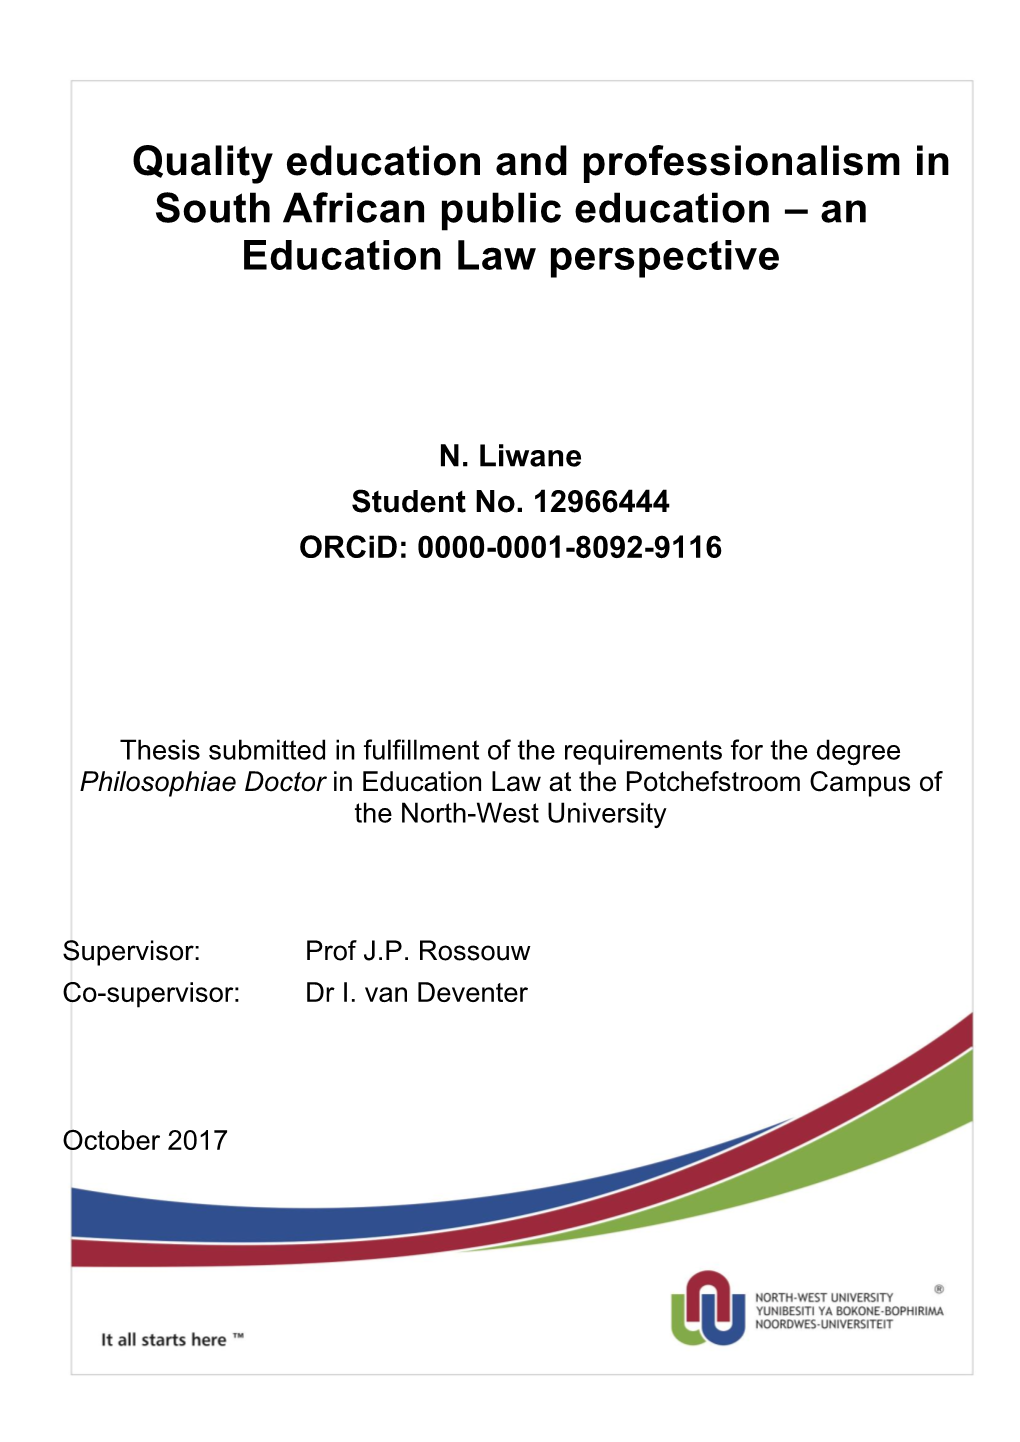 Quality Education and Professionalism in South African Public Education – an Education Law Perspective